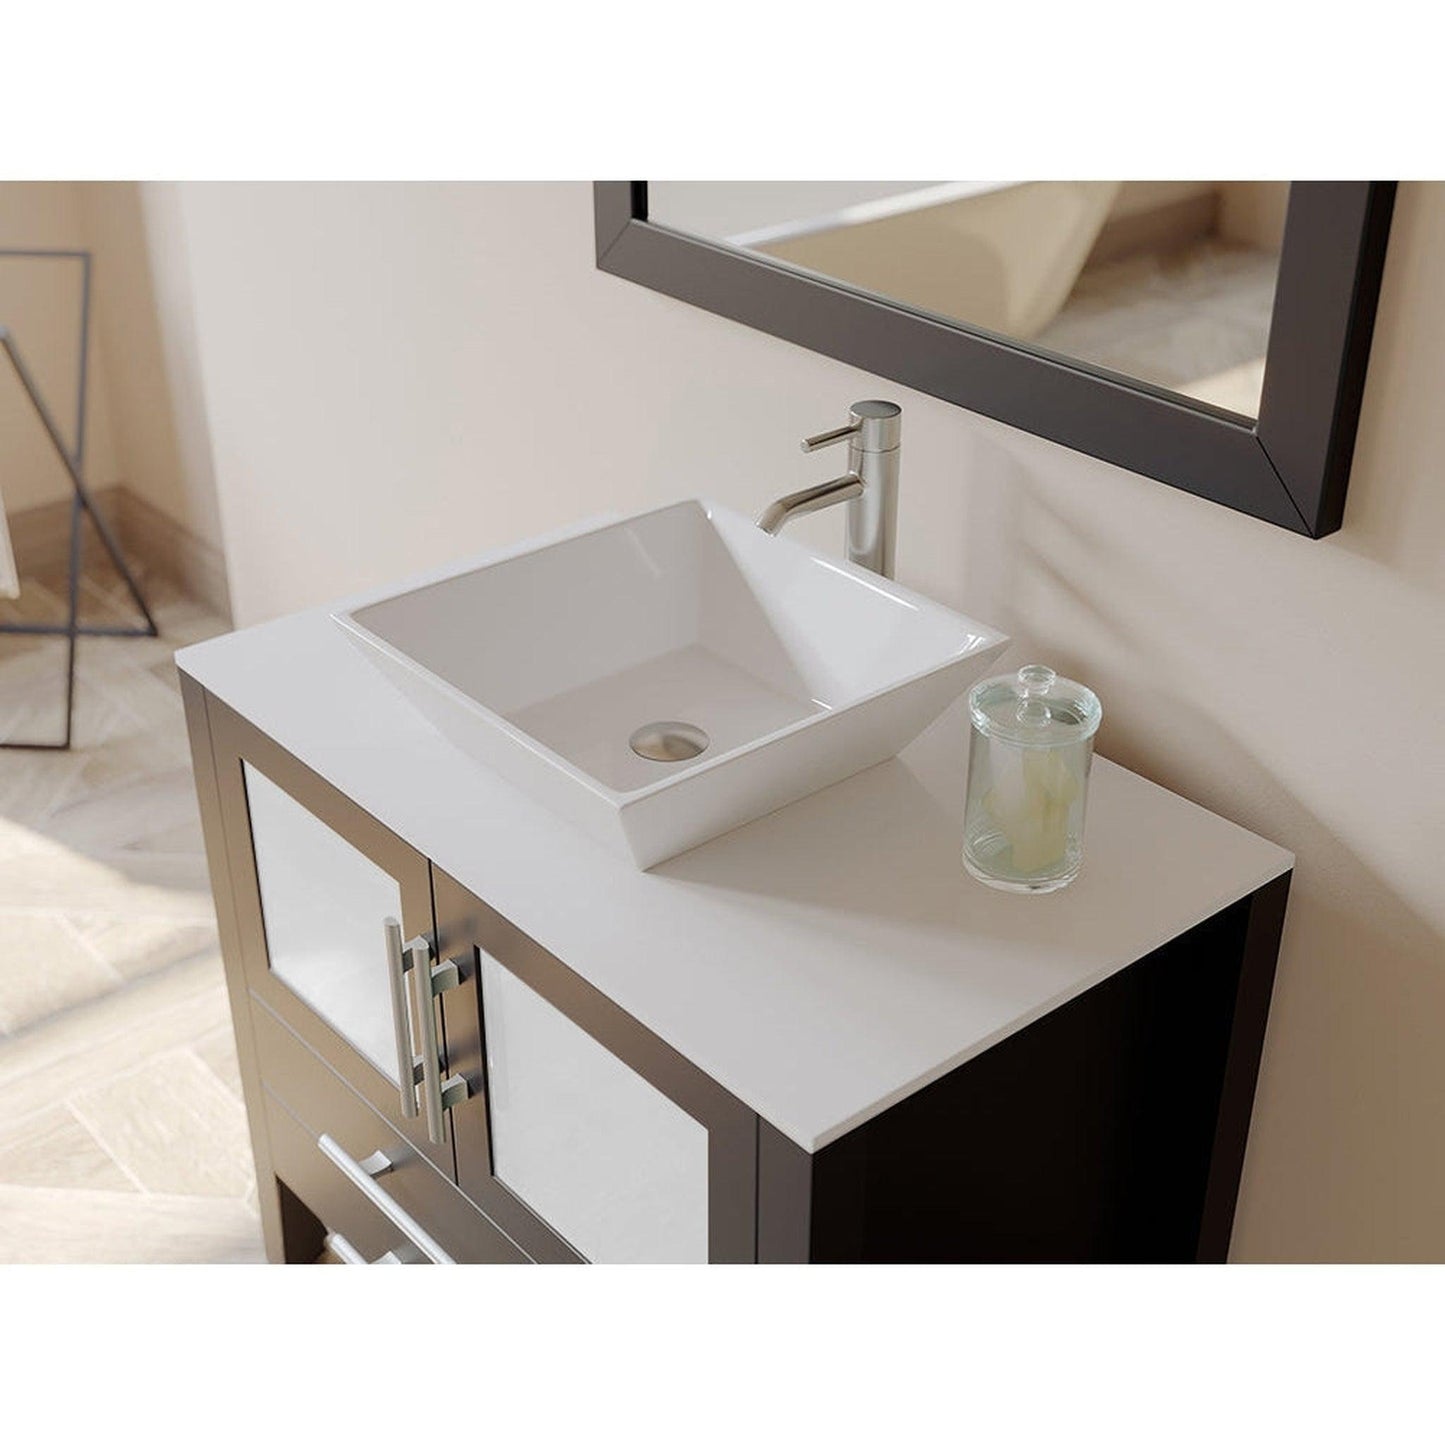 Cambridge Plumbing 36" Black Espresso Wood Single Vanity Set With Porcelain Countertop And Square Vessel Sink With Polished Chrome Plumbing Finish